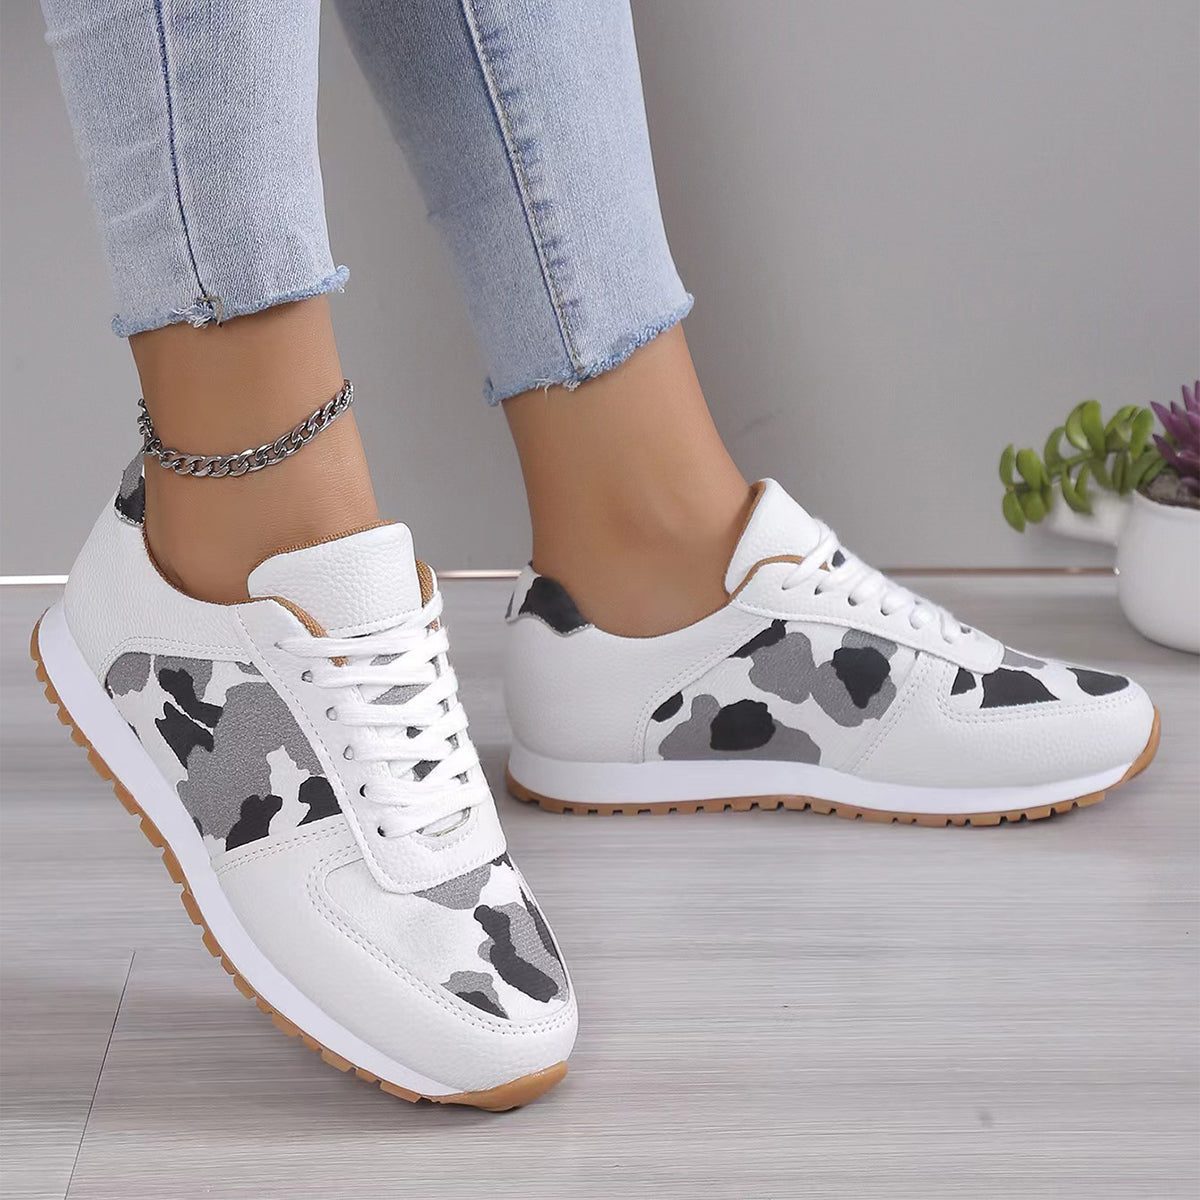 Fashoin Leopard Print Lace-up Sports Shoes For Women Sneakers Casual Running Walking Flat Shoes